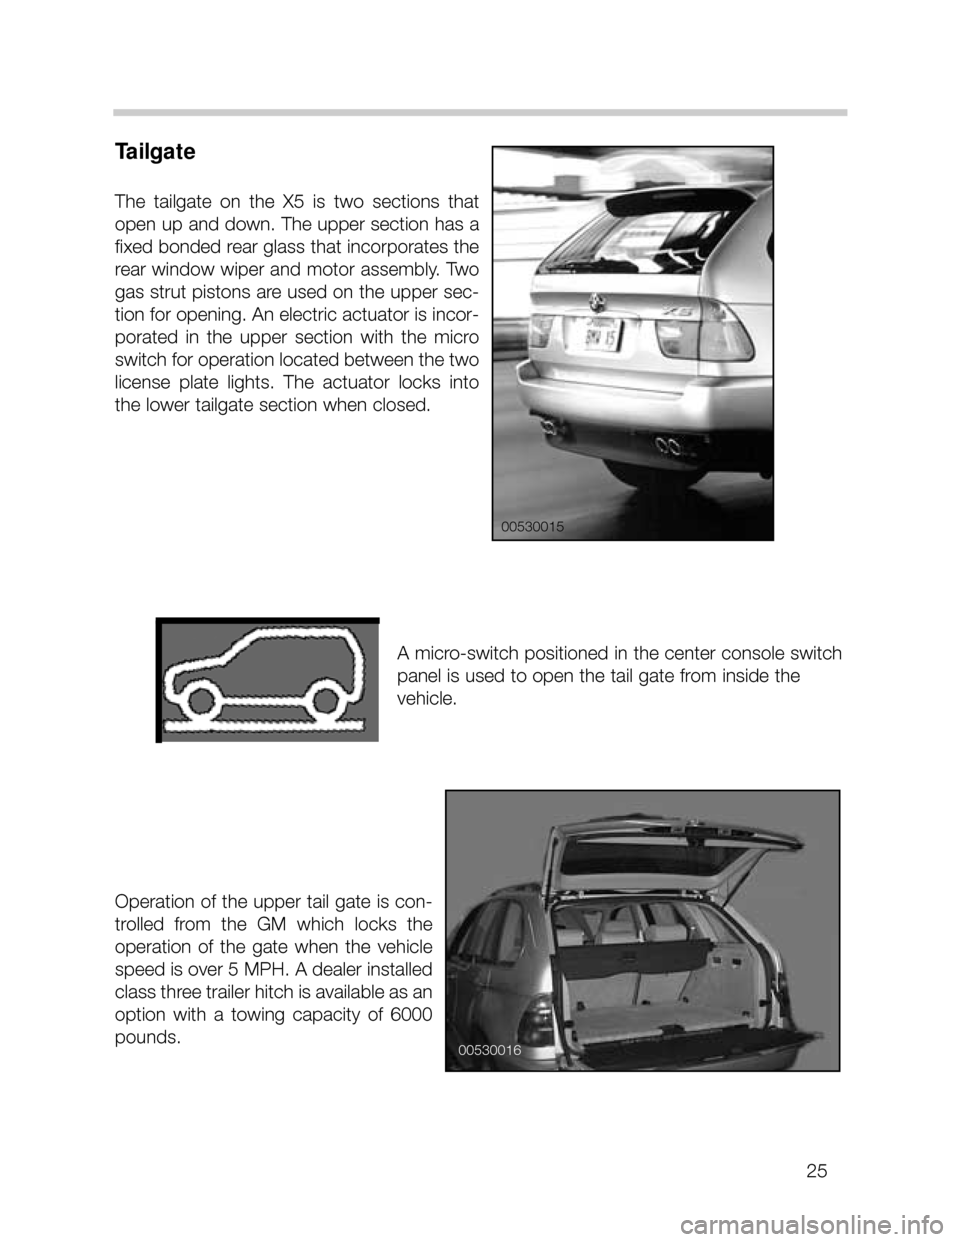 BMW X5 2004 E53 Owners Manual 25
Tailgate
The  tailgate  on  the  X5  is  two  sections  that
open up and down. The upper section has a
fixed bonded rear glass that incorporates the
rear window wiper and motor assembly. Two
gas st